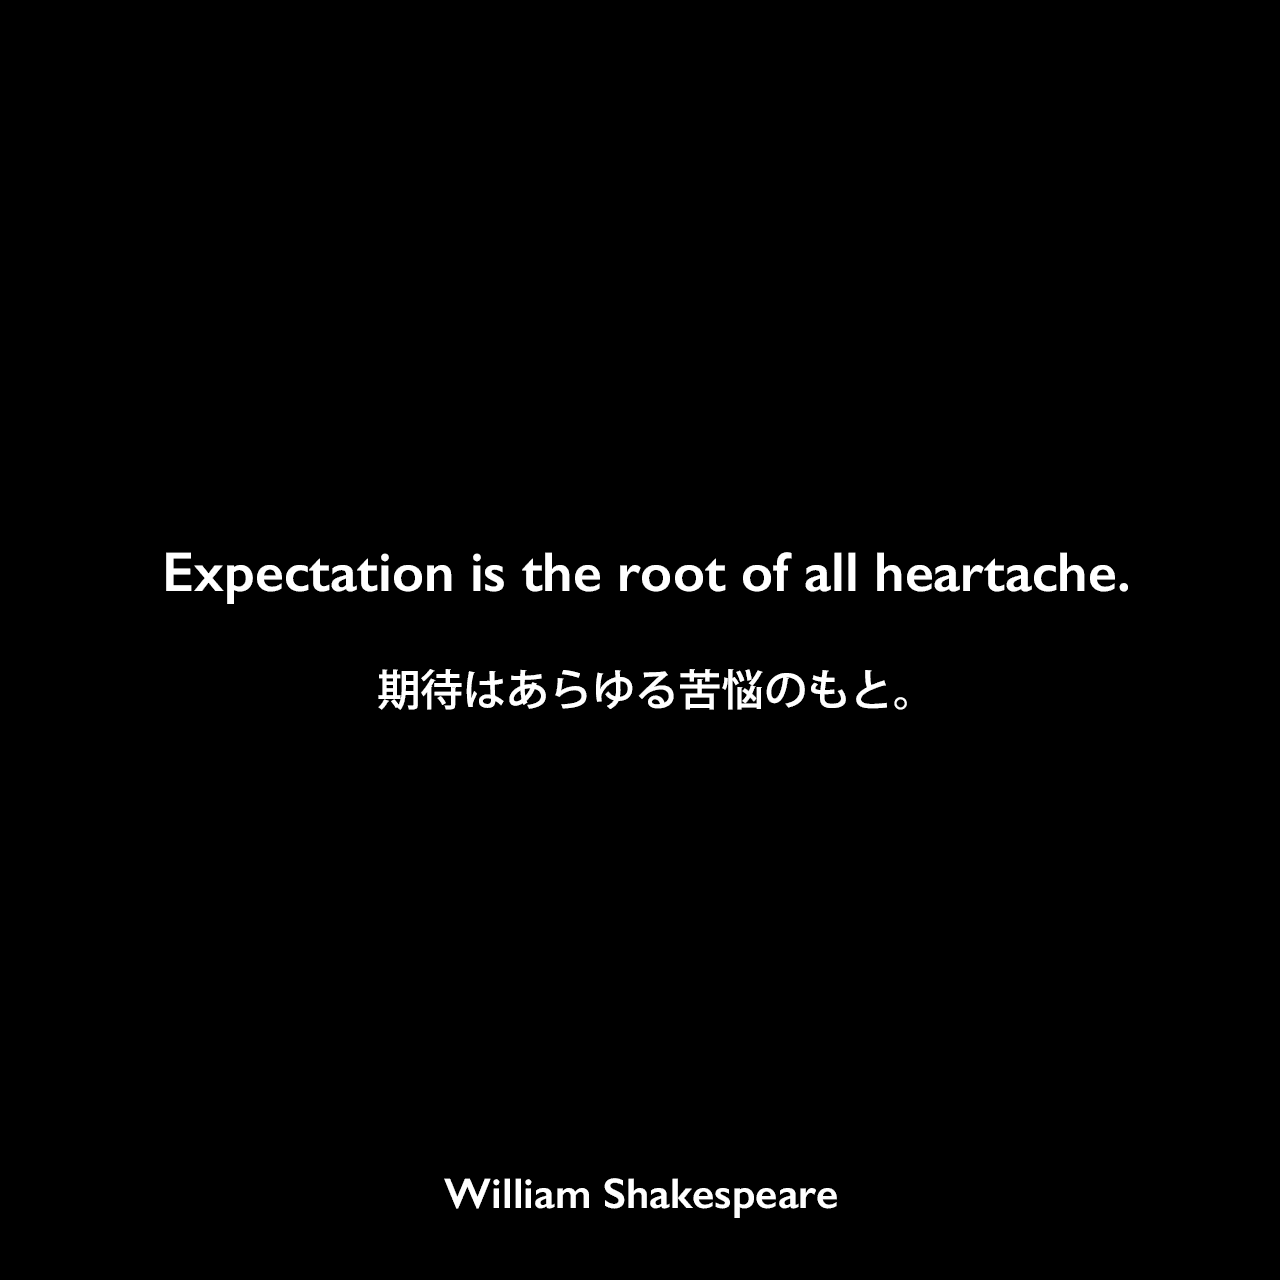 Expectation is the root of all heartache.期待はあらゆる苦悩のもと。William Shakespeare